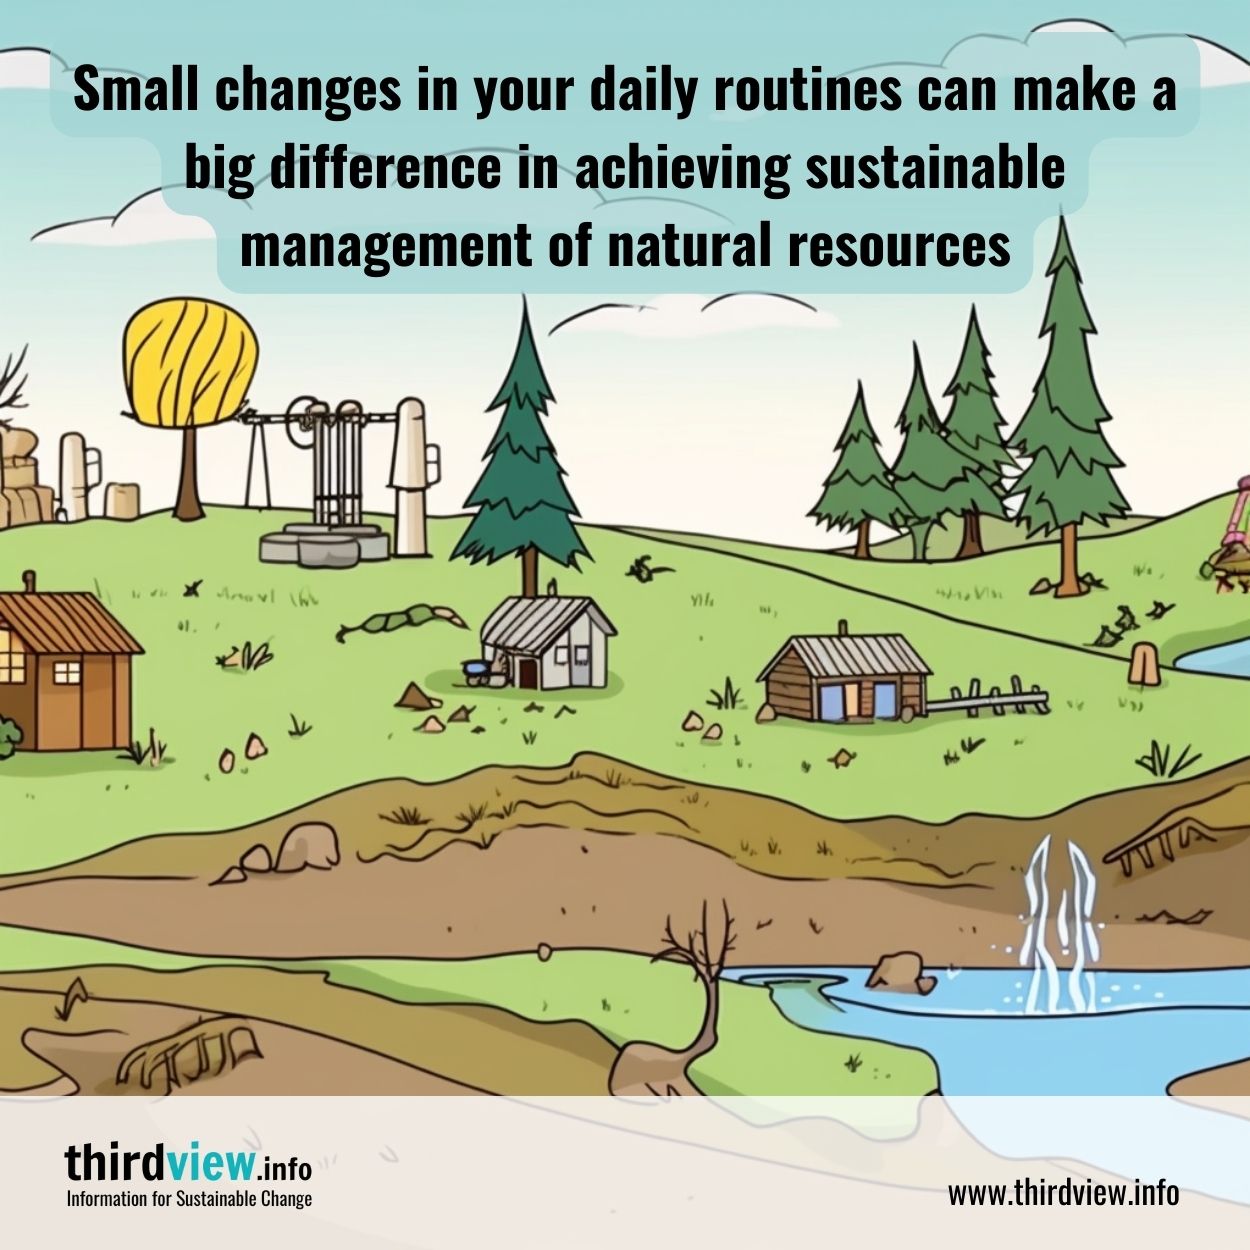 Small changes in your daily routines can make a big difference in achieving sustainable management of natural resources